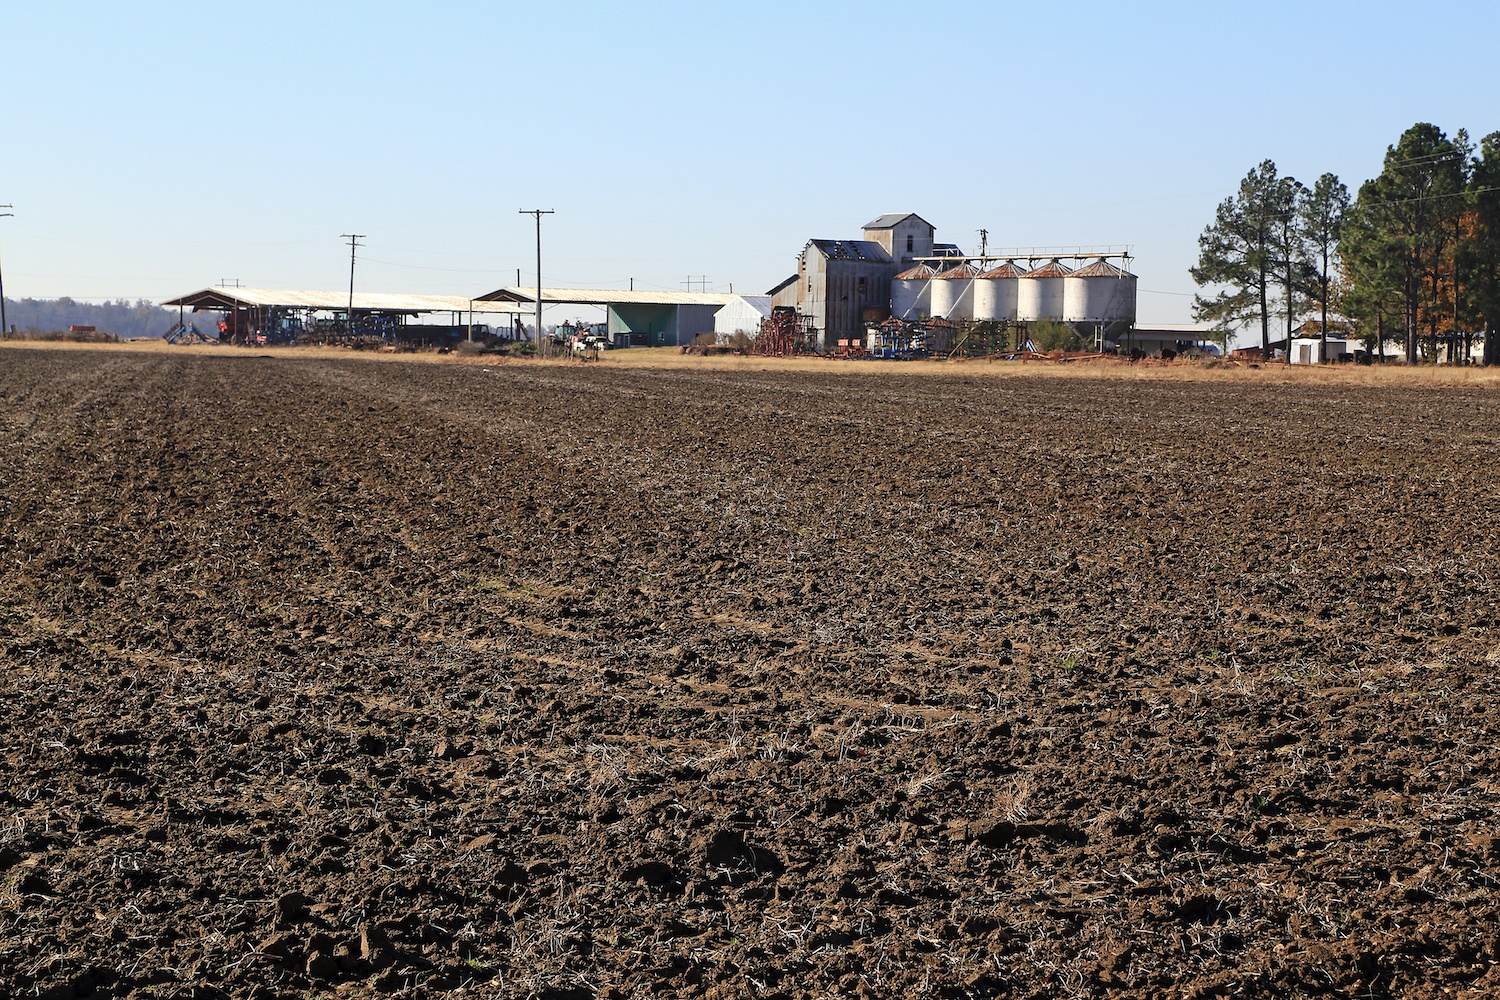 Large black land farm in Eastern Arkansas with plowed field laying fallow. Seed and grain silos in background with sheds and farm equipment.